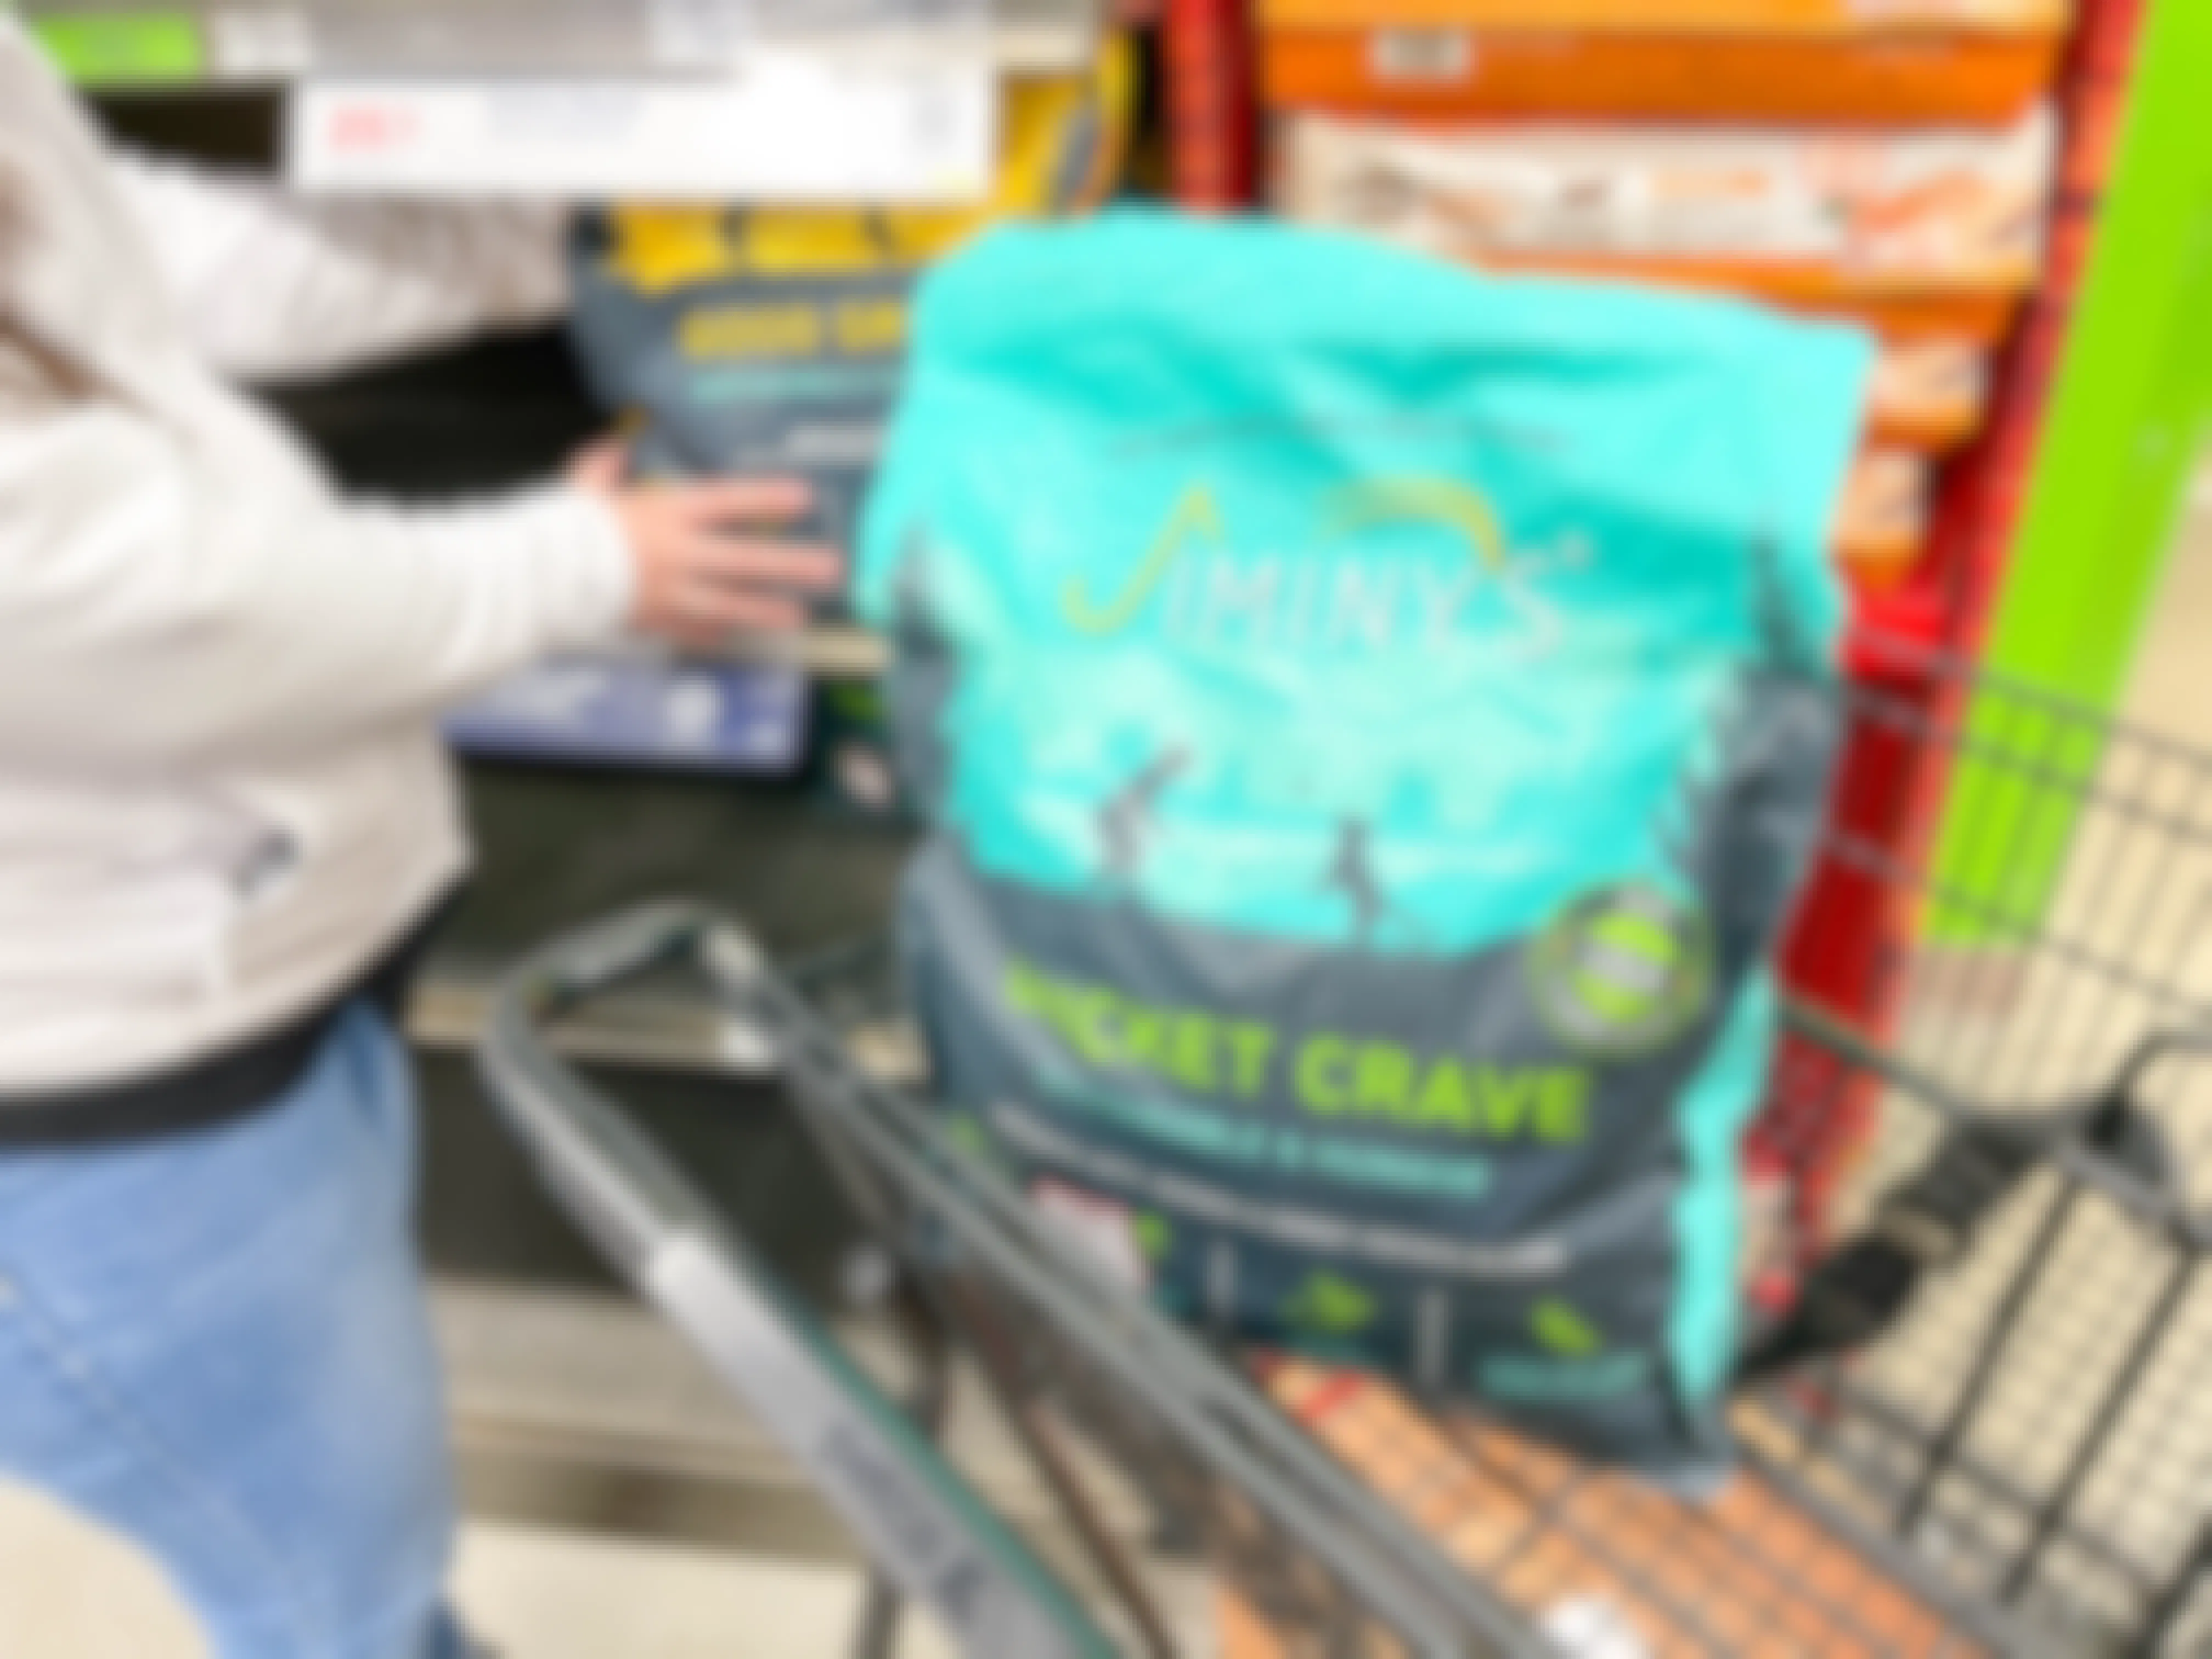 a person grabbing dog food off shelf with a bag of dog food in cart